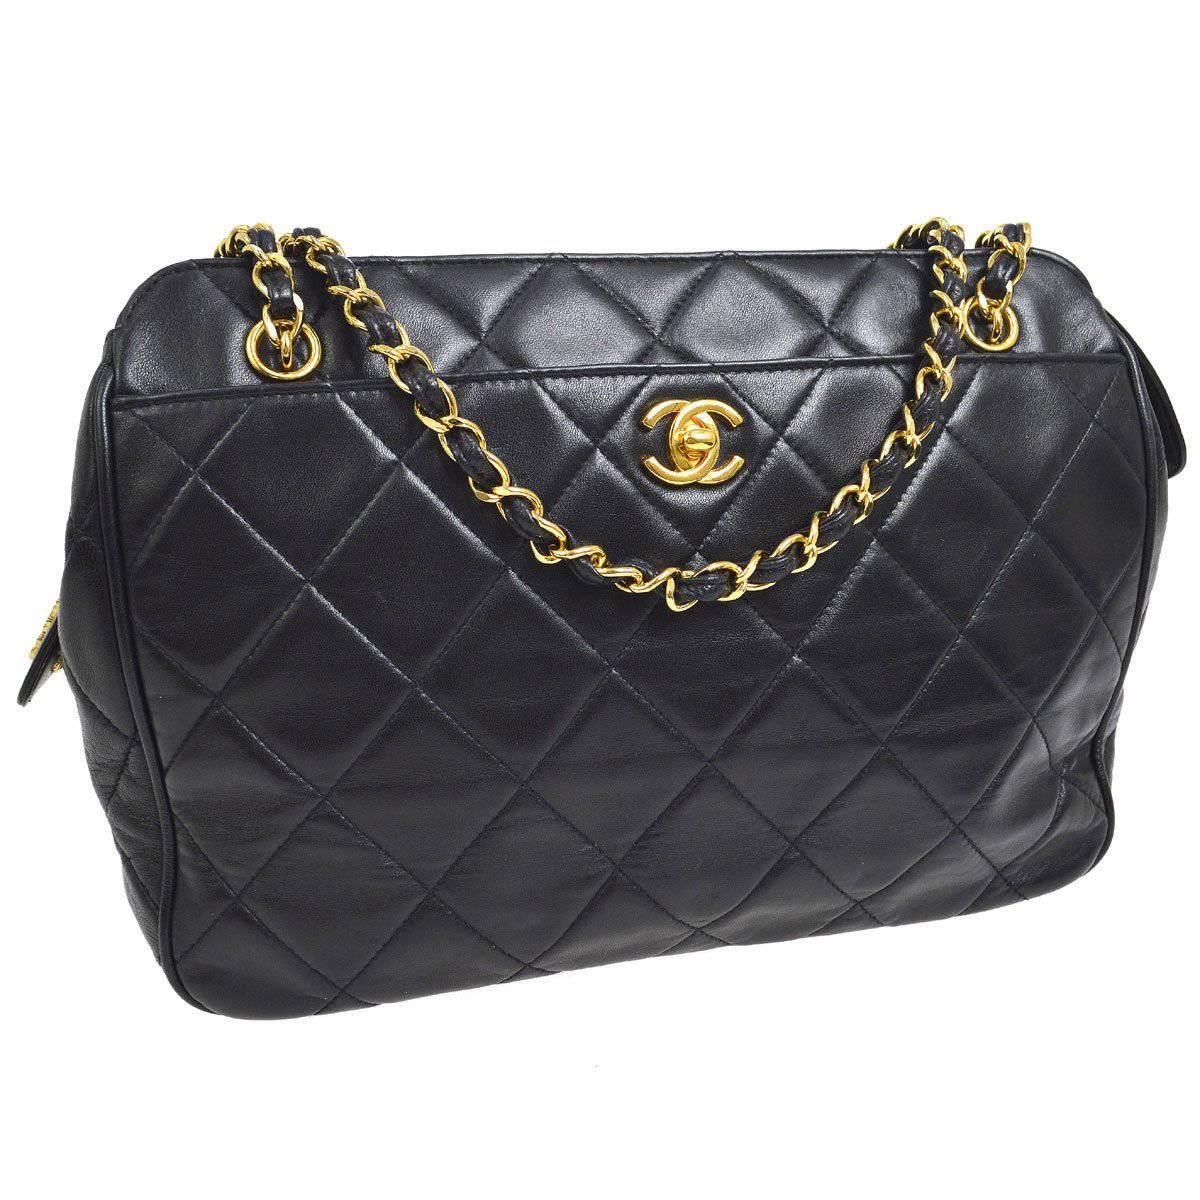 Chanel Black Lambskin Leather Quilted Carryall Evening Tote Shoulder Bag